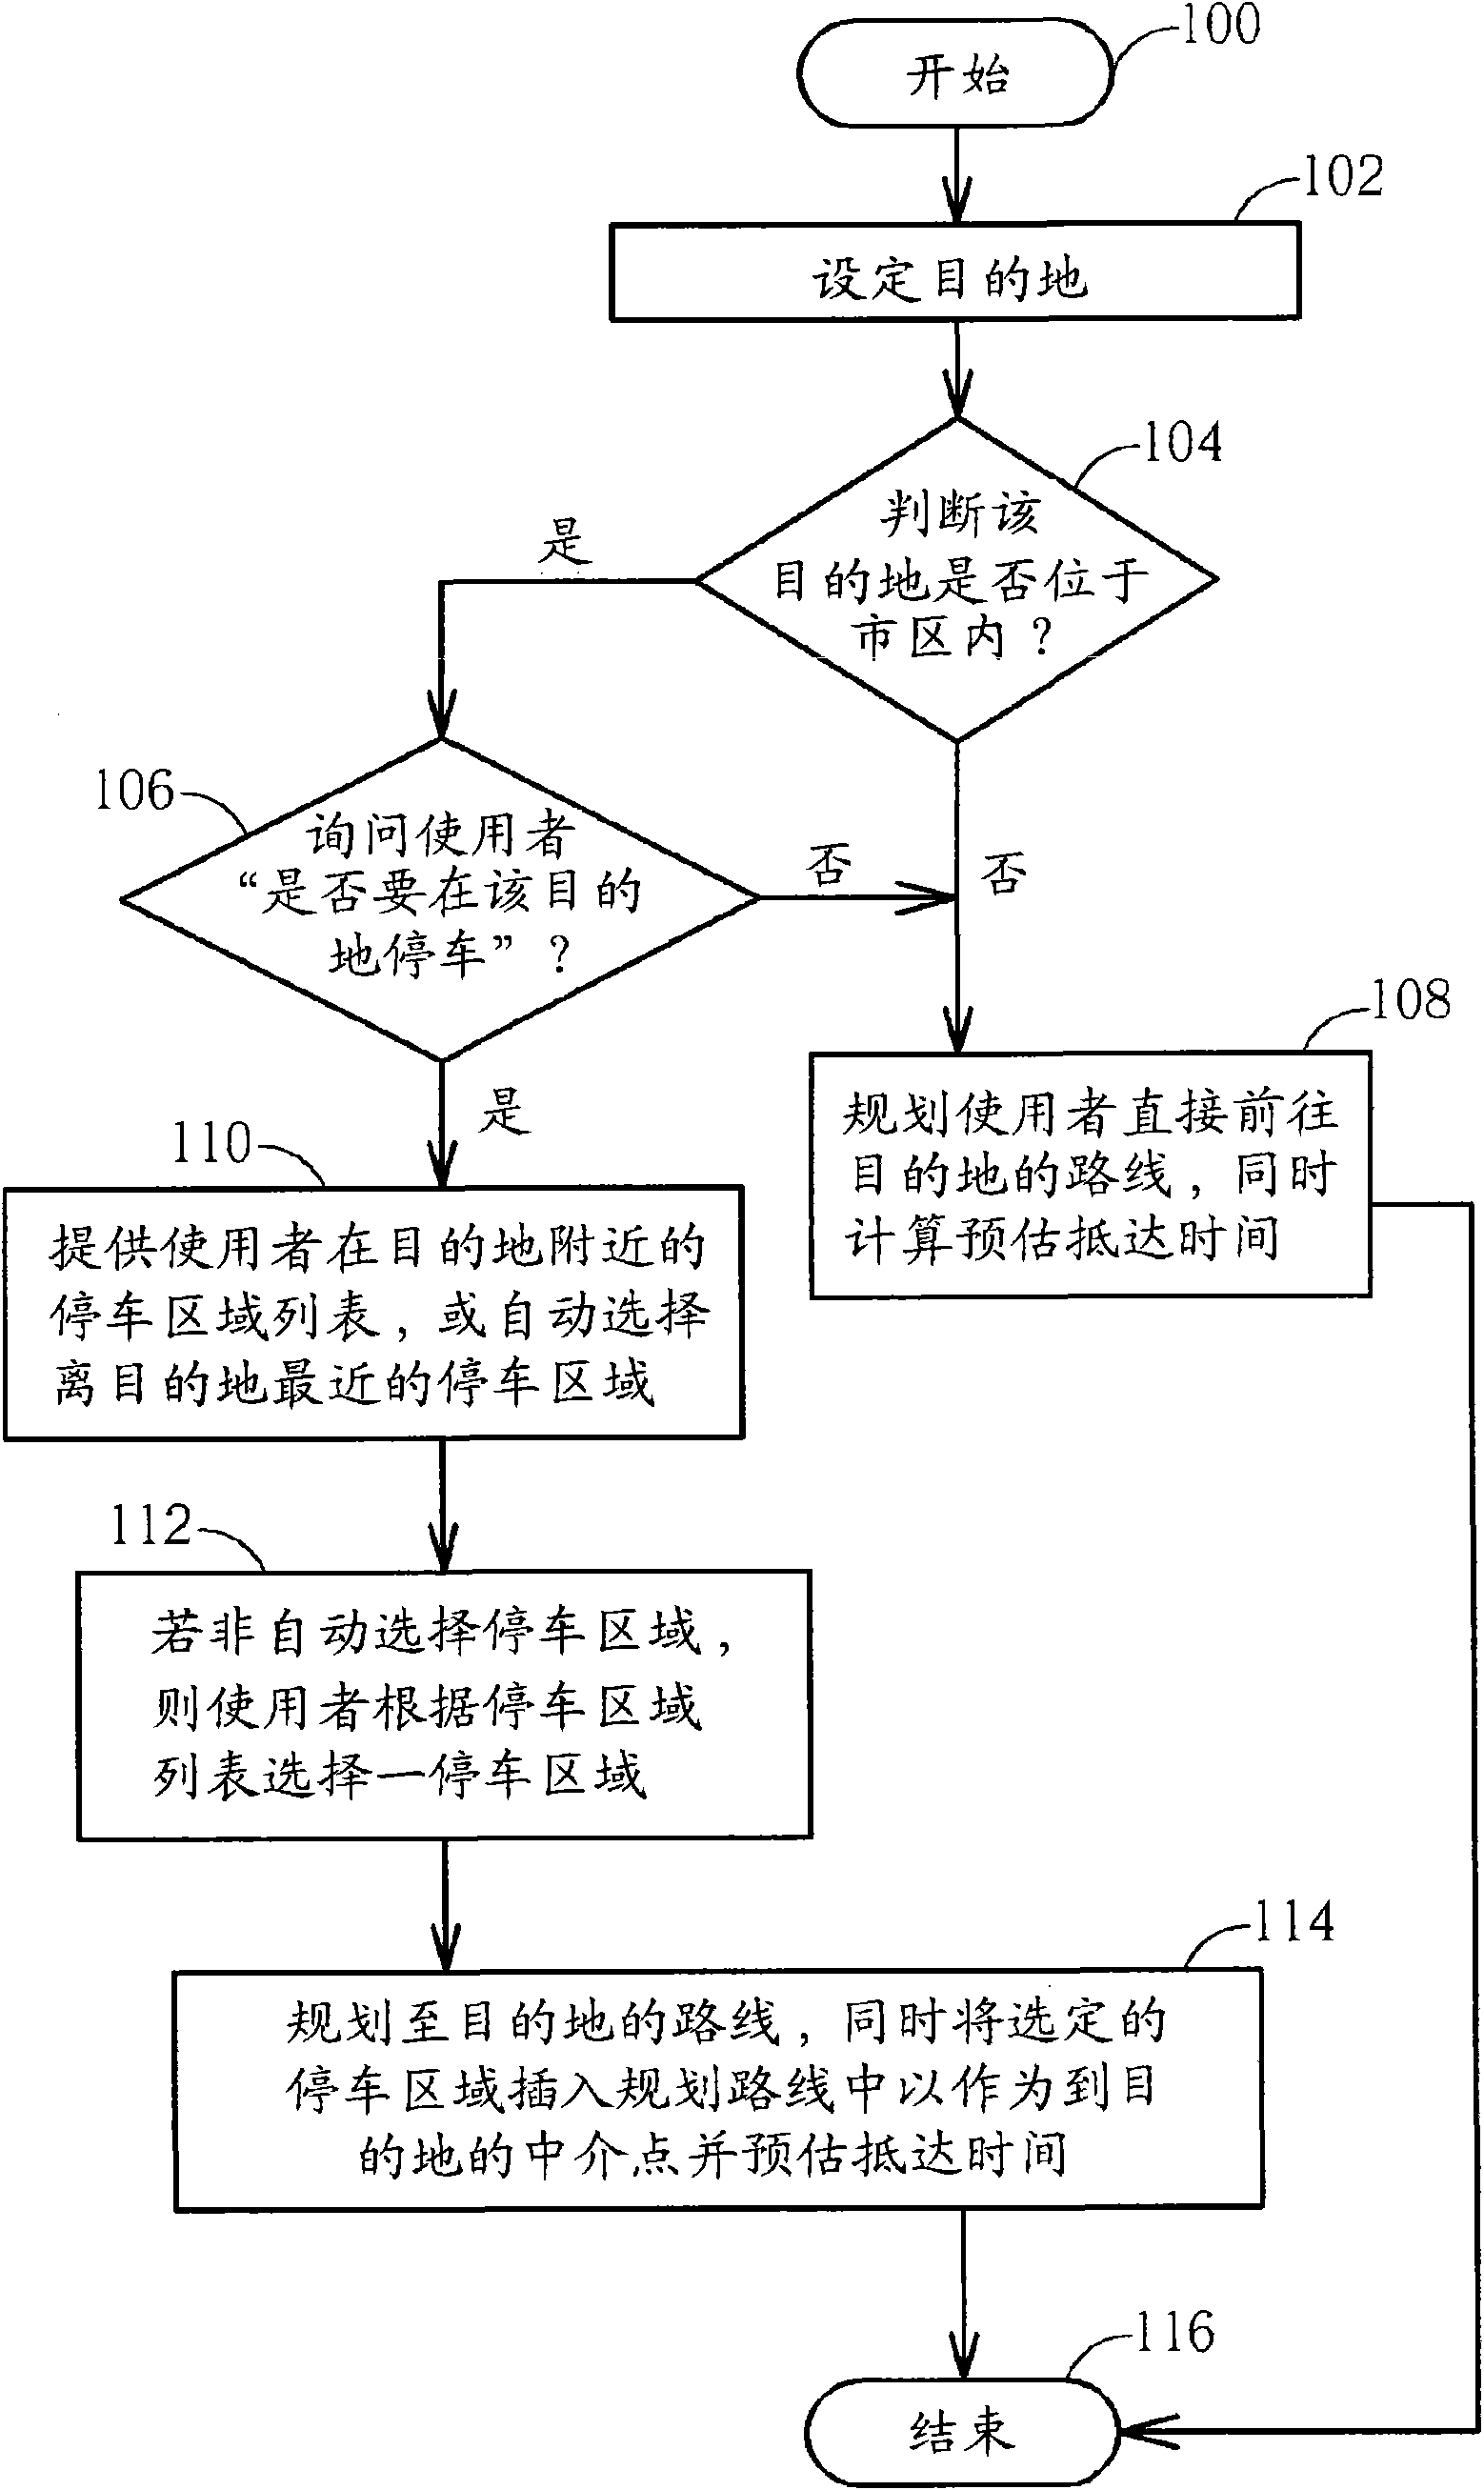 Navigation method and personal navigation device for assisting parking nearby destination